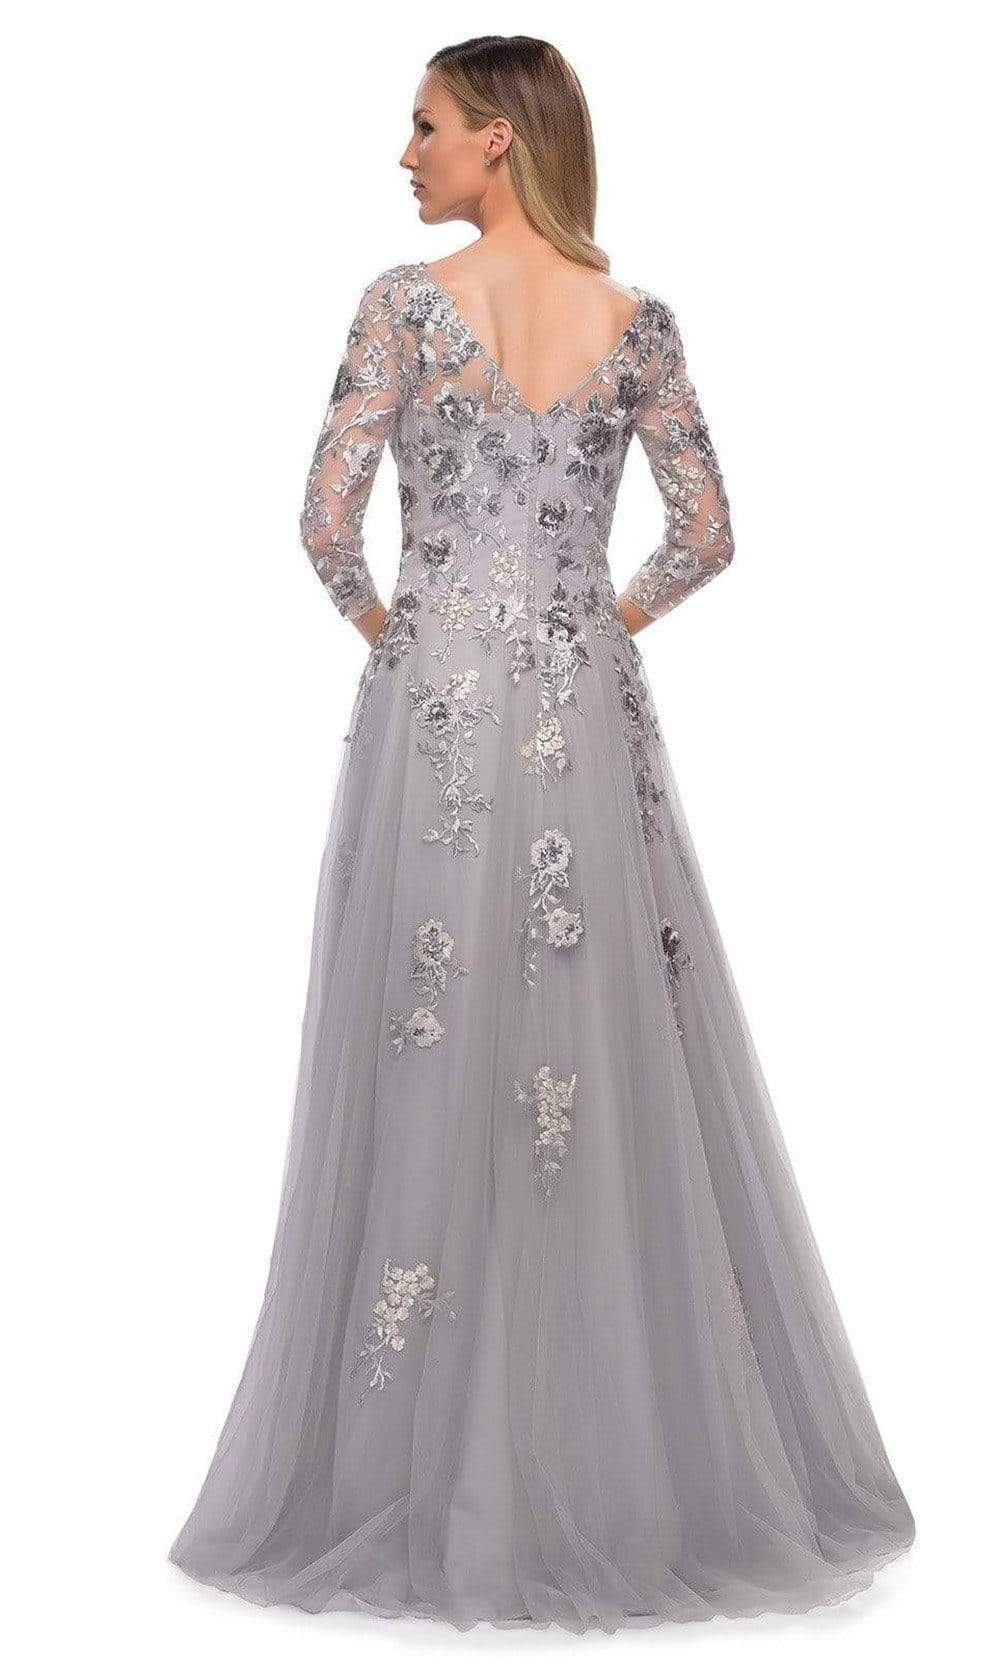 La Femme - 29825 Long Sleeve Dazzling Tulle Gown Mother of the Bride Dresses